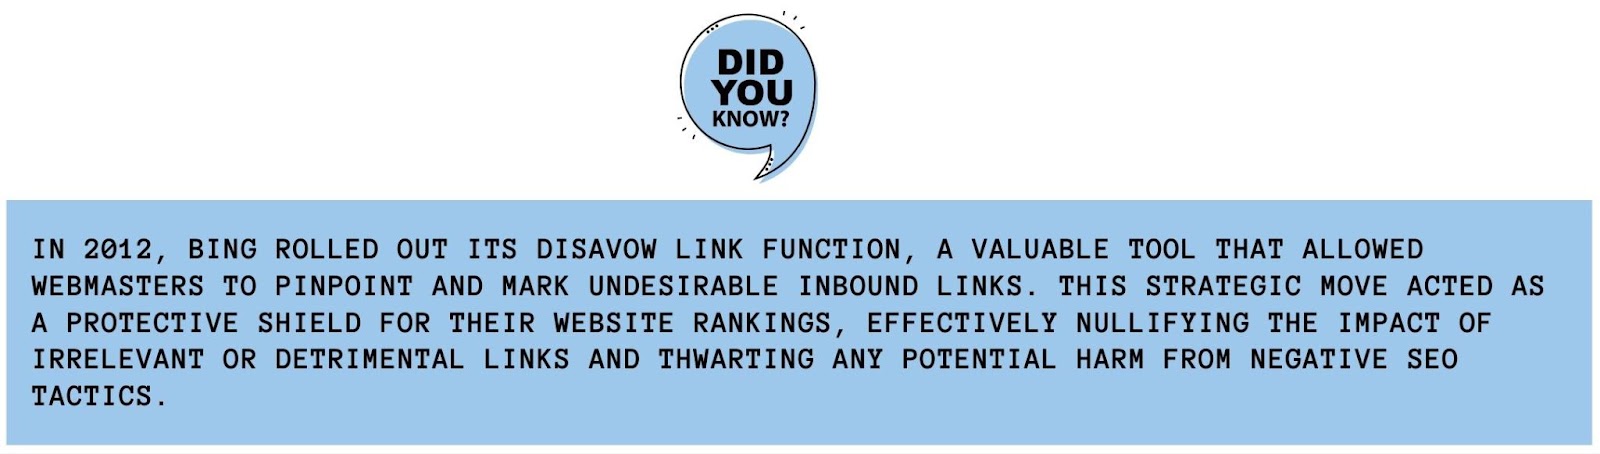 The Bing Disavow link feature, introduced in 2012, enabled website owners to designate unwanted incoming links. This safeguarded their site’s ranking from negative SEO attacks by disregarding irrelevant or harmful links.